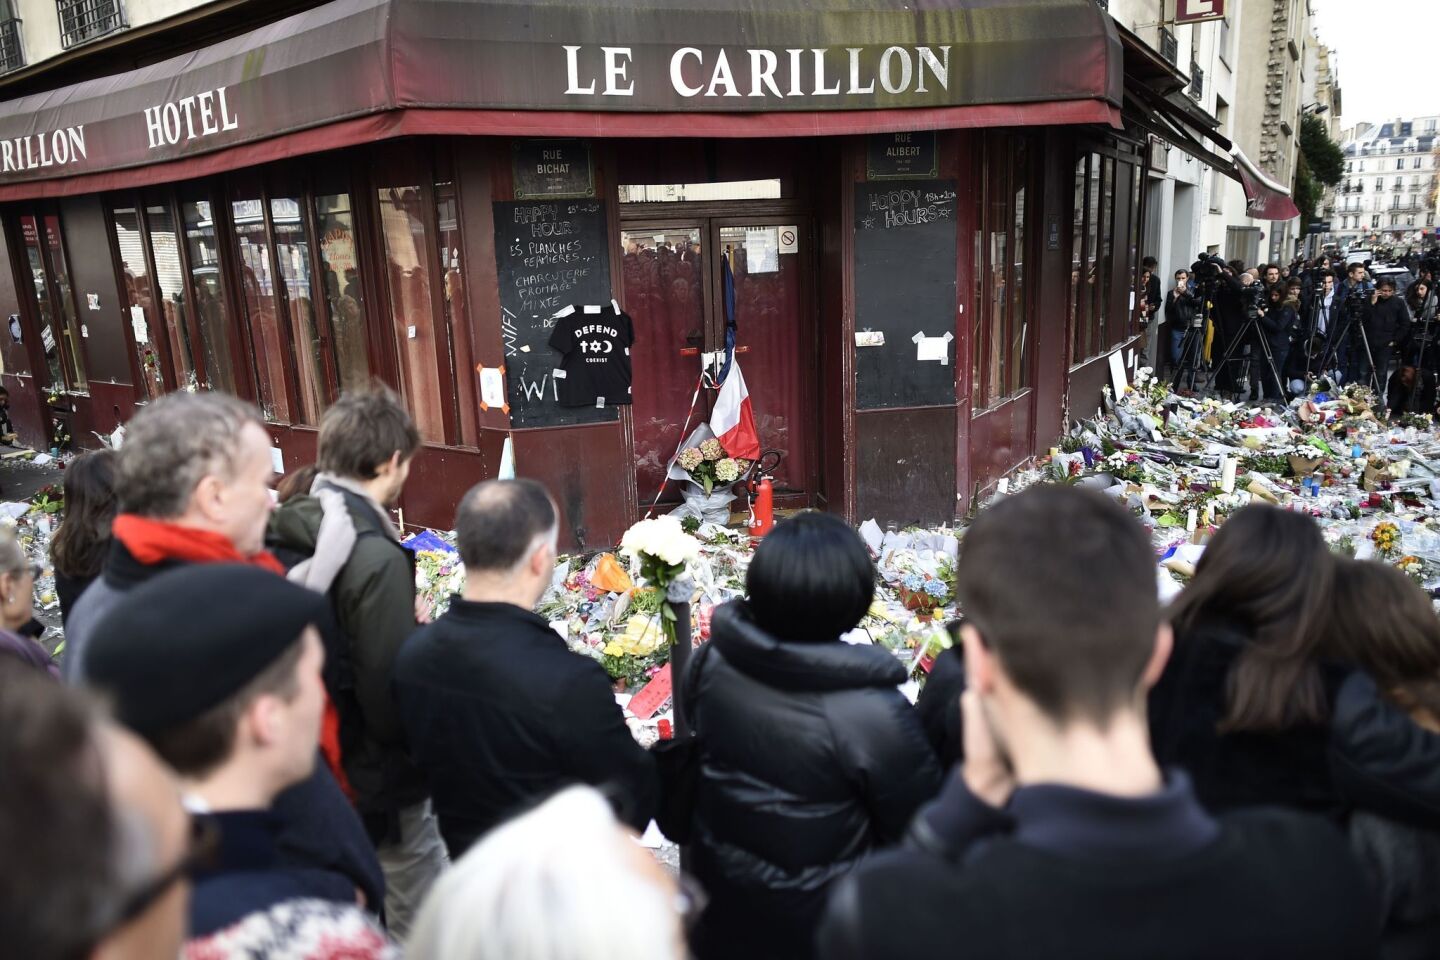 People observe a minute of silence in front of the Le Carillon cafe in Paris on Nov. 16, paying tribute to victims of the terror attacks.